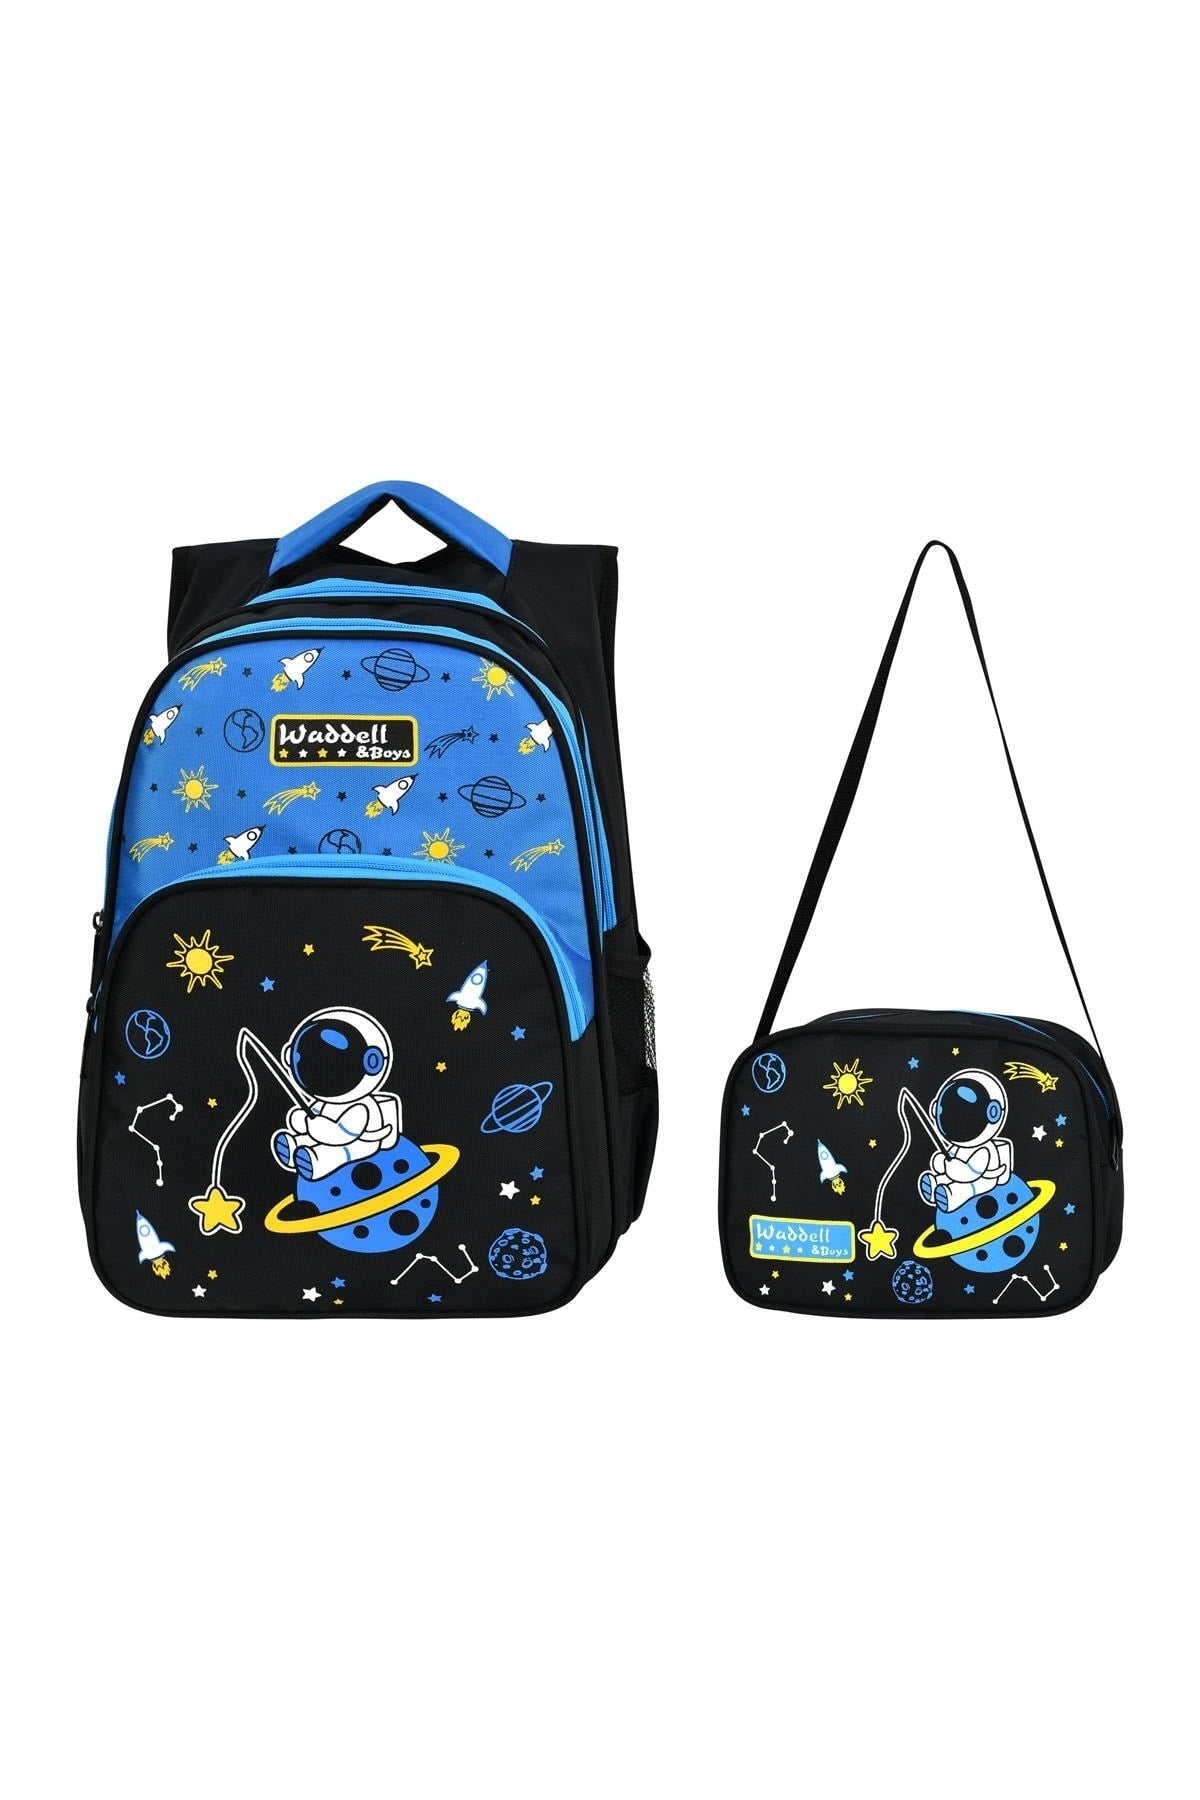 Astronaut Primary School Bag With Lunch Box